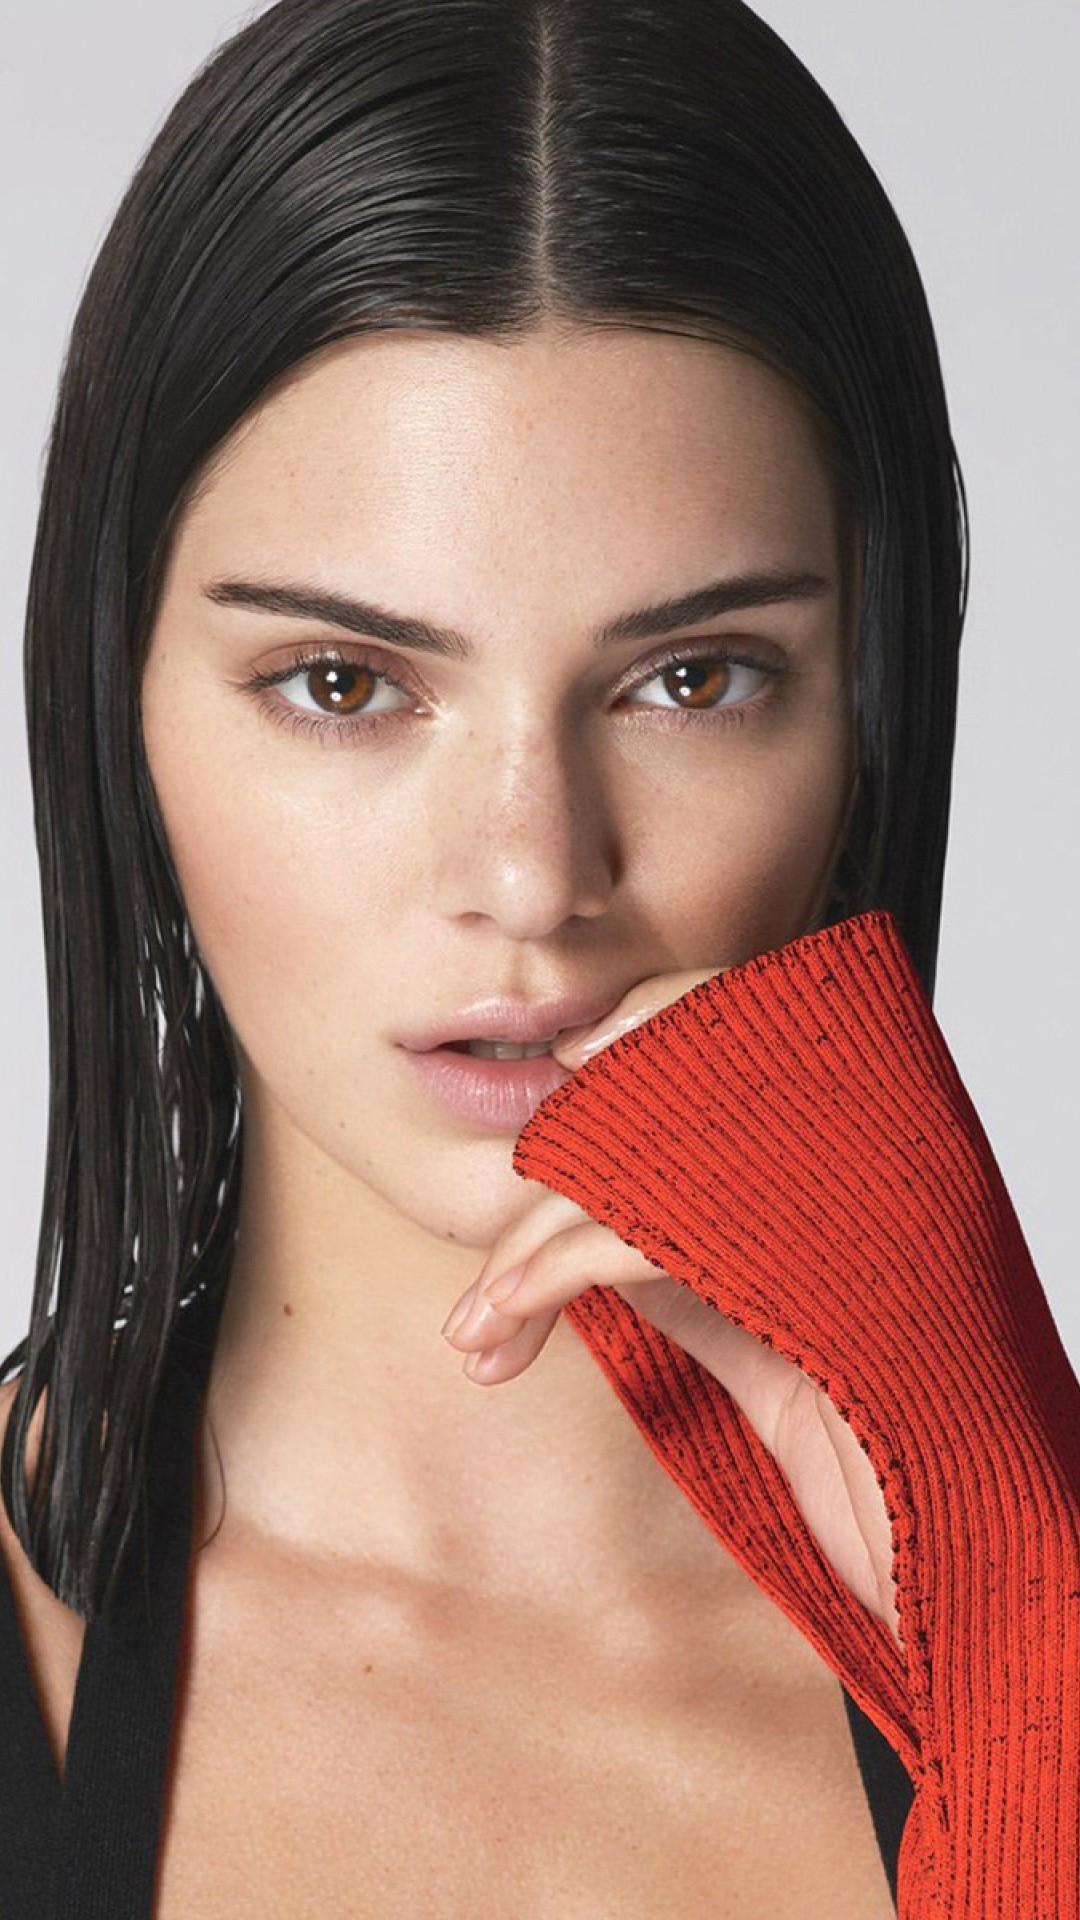 Kendall Jenner iphone wallpaper high quality